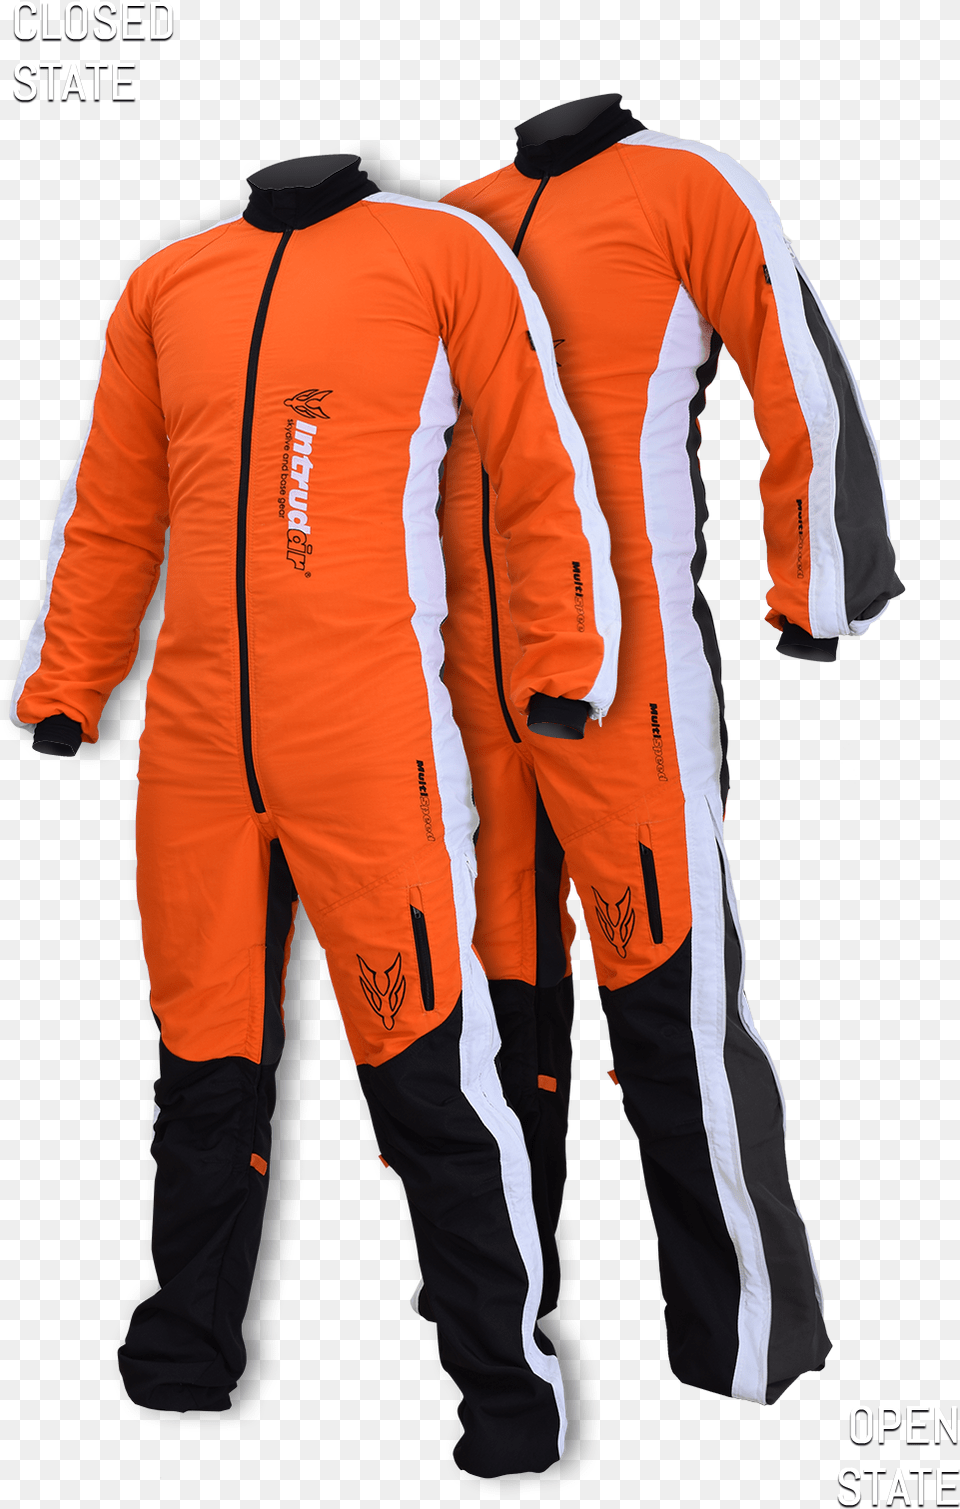 Arms Closed Zip Dry Suit, Clothing, Coat, Jacket, Adult Free Transparent Png